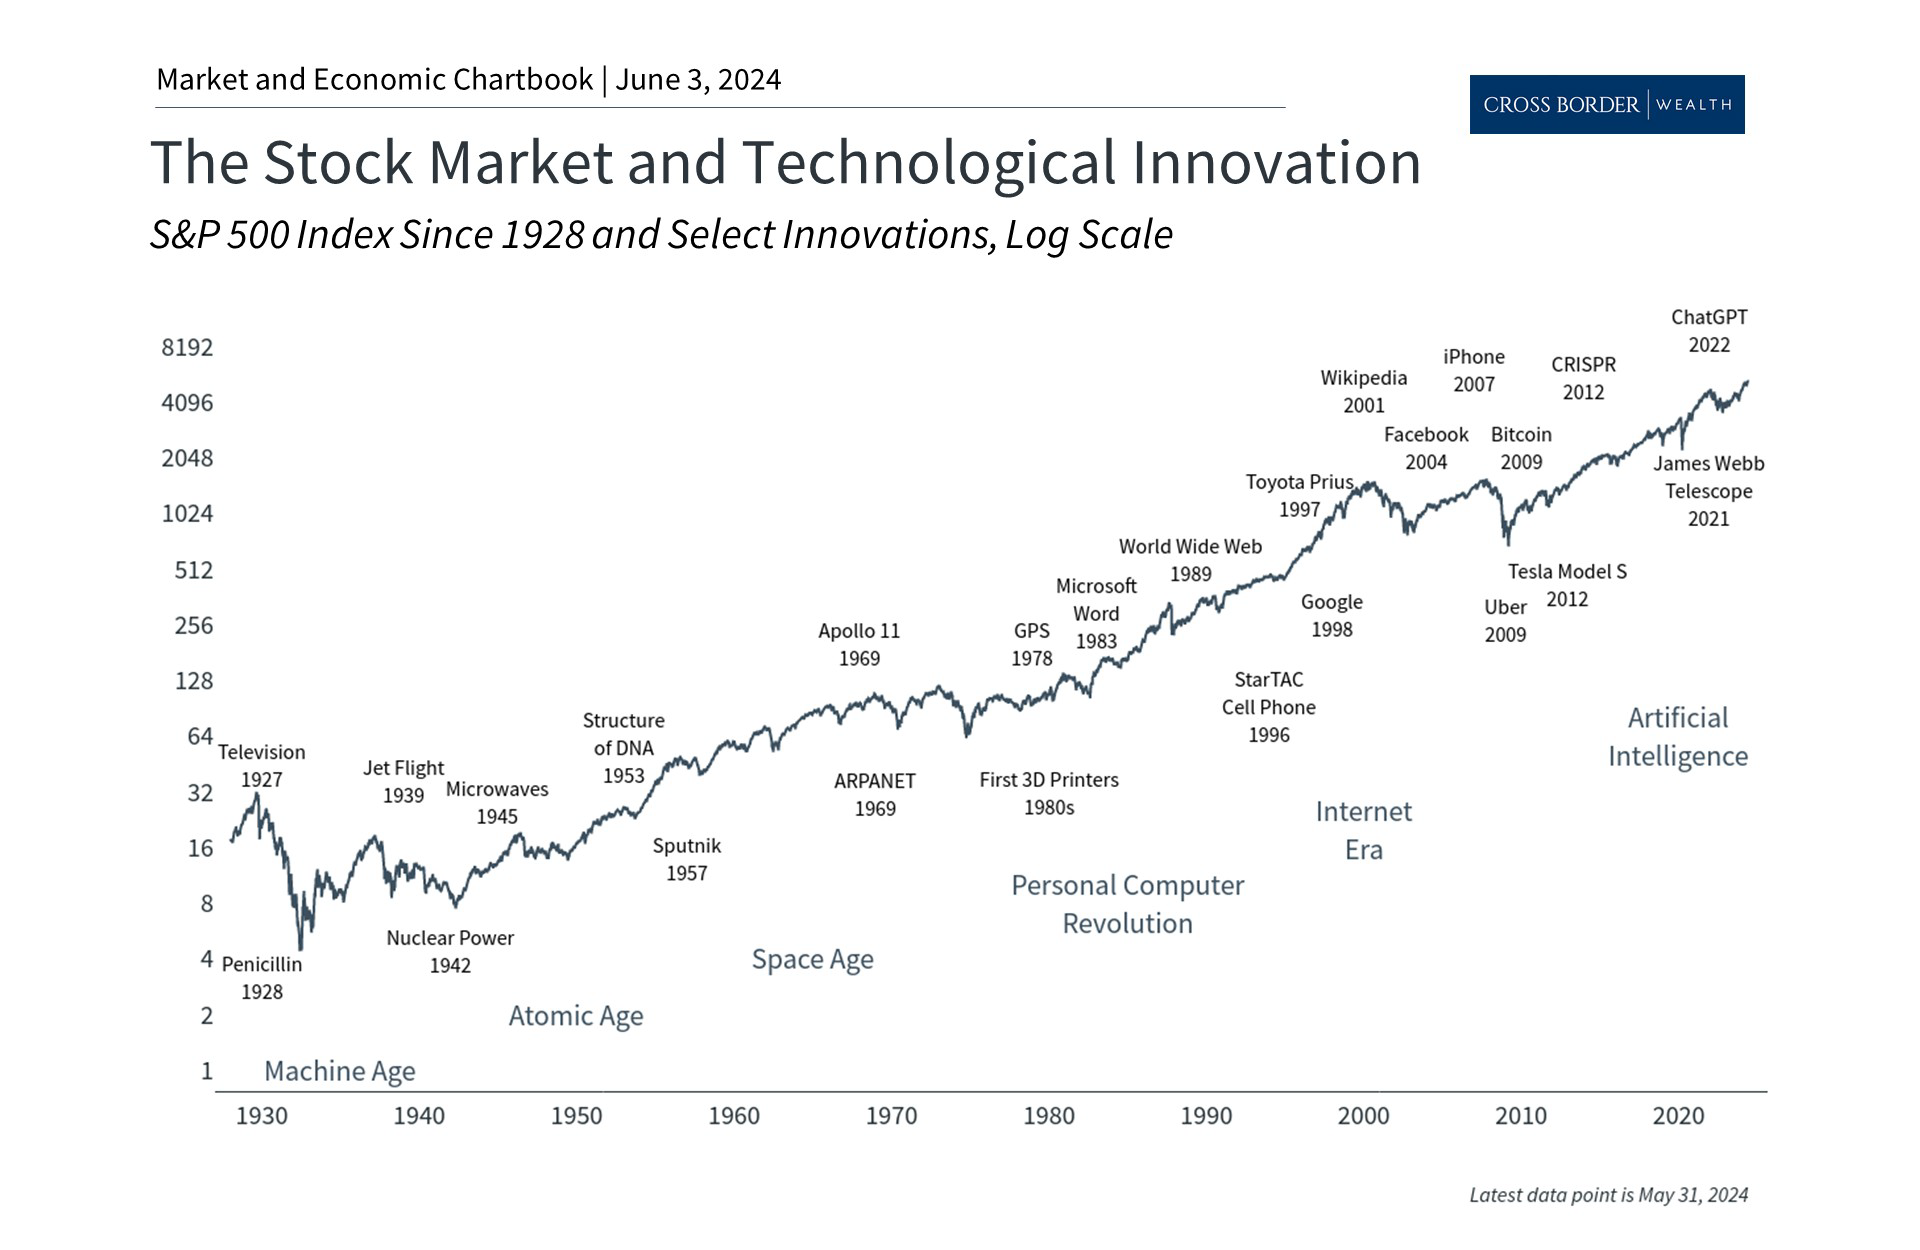 How Technological Innovations Impact the Stock Market